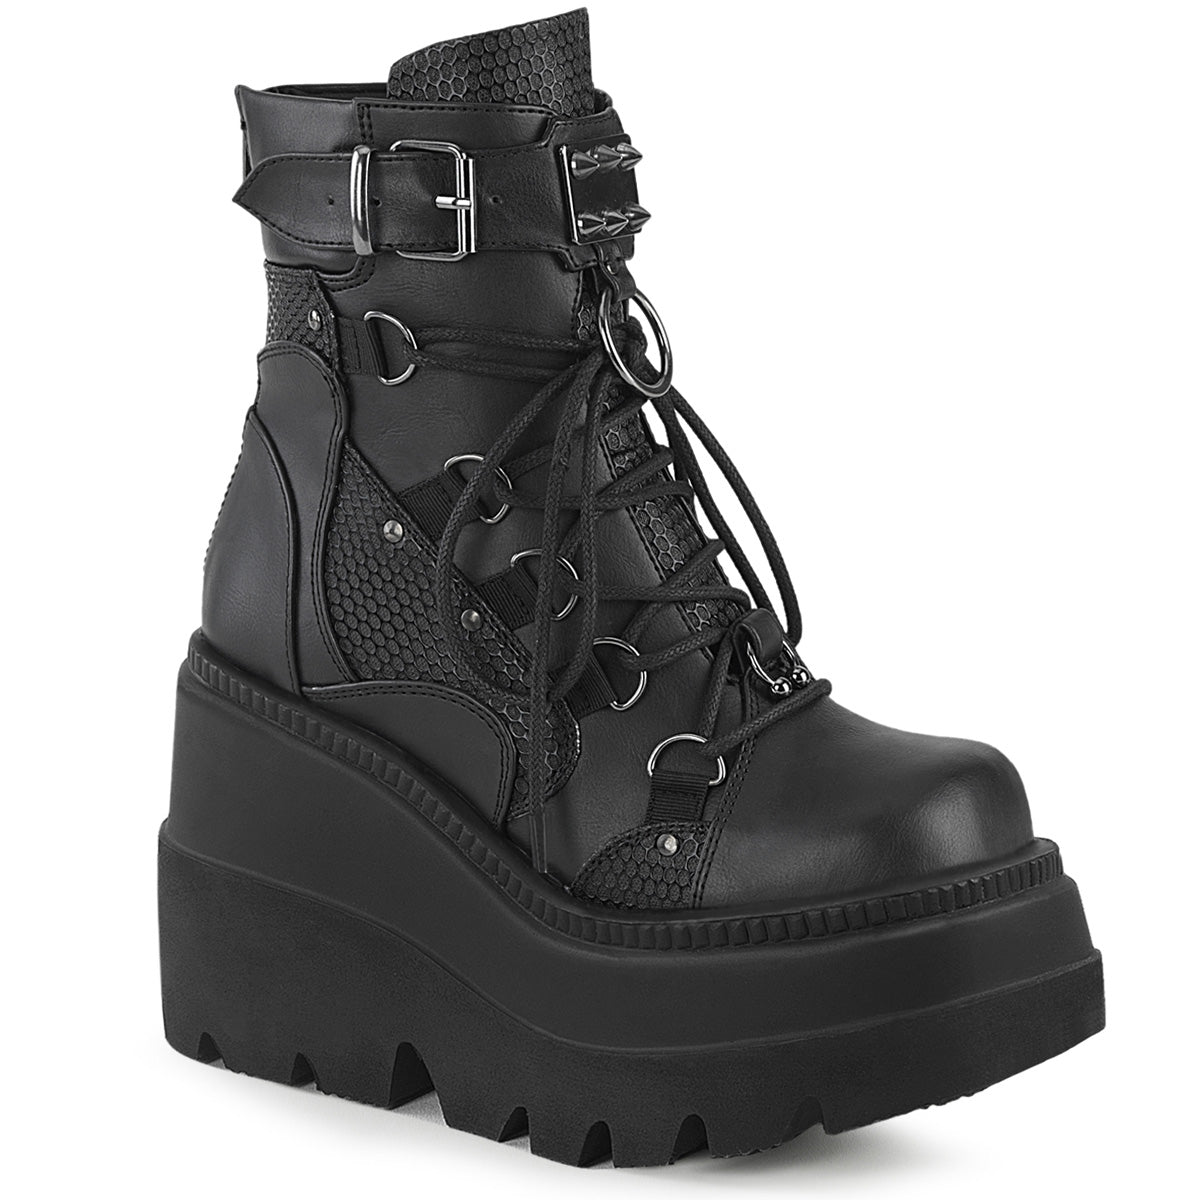 DemoniaCult Womens Ankle Boots SHAKER-60 Blk Vegan Leather